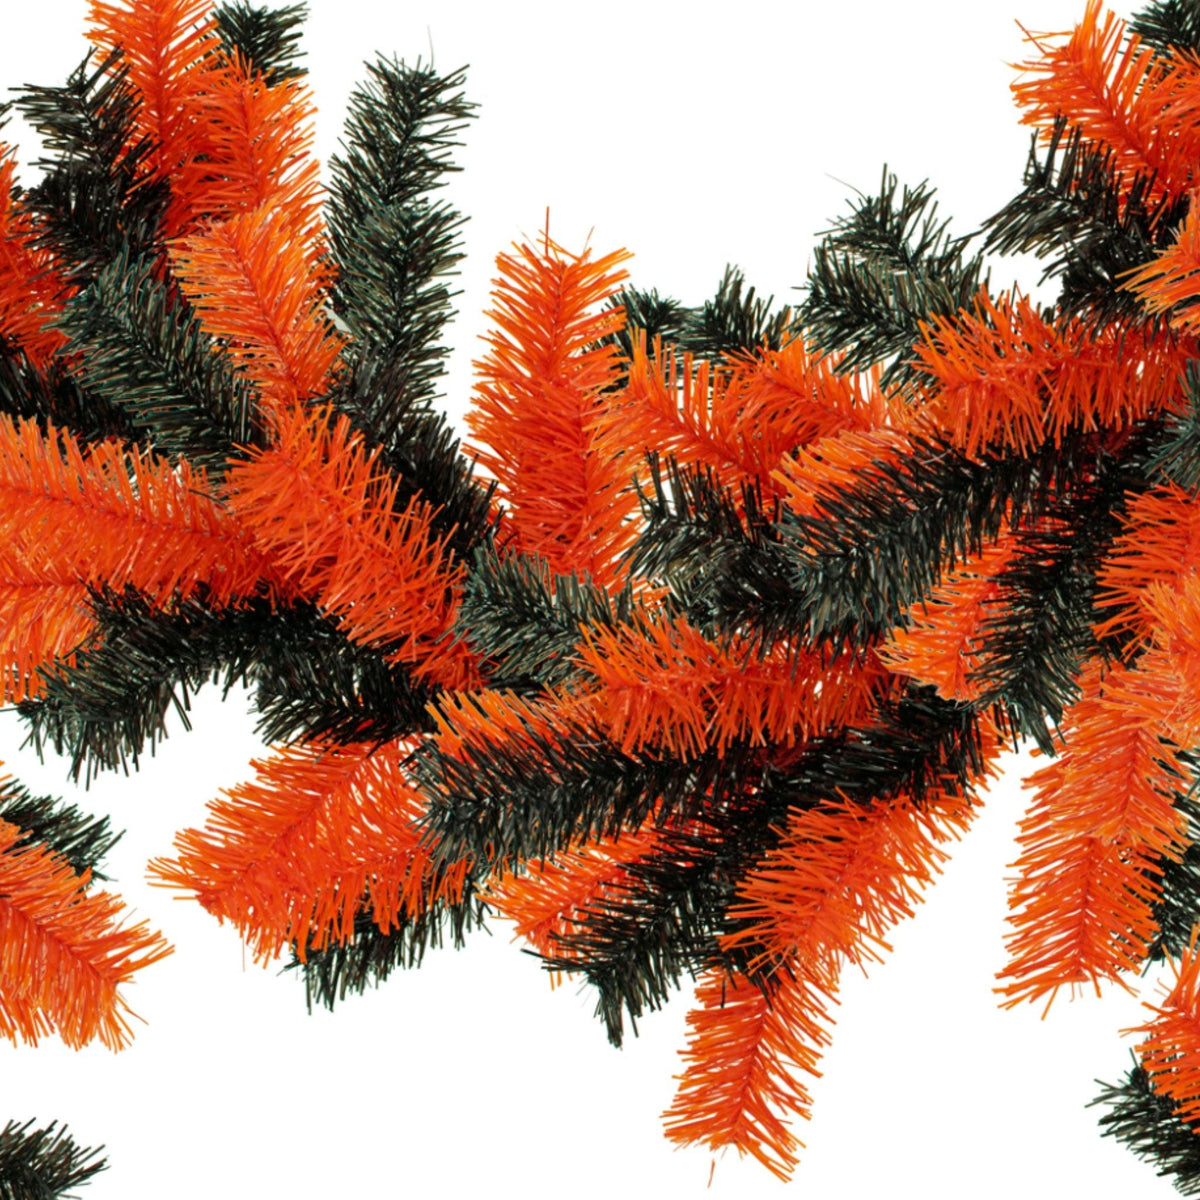 Shop for Lee Display's brand new 6FT Orange and Black Halloween Tinsel Brush Garlands on sale now at leedisplay.com.  Middle Section.